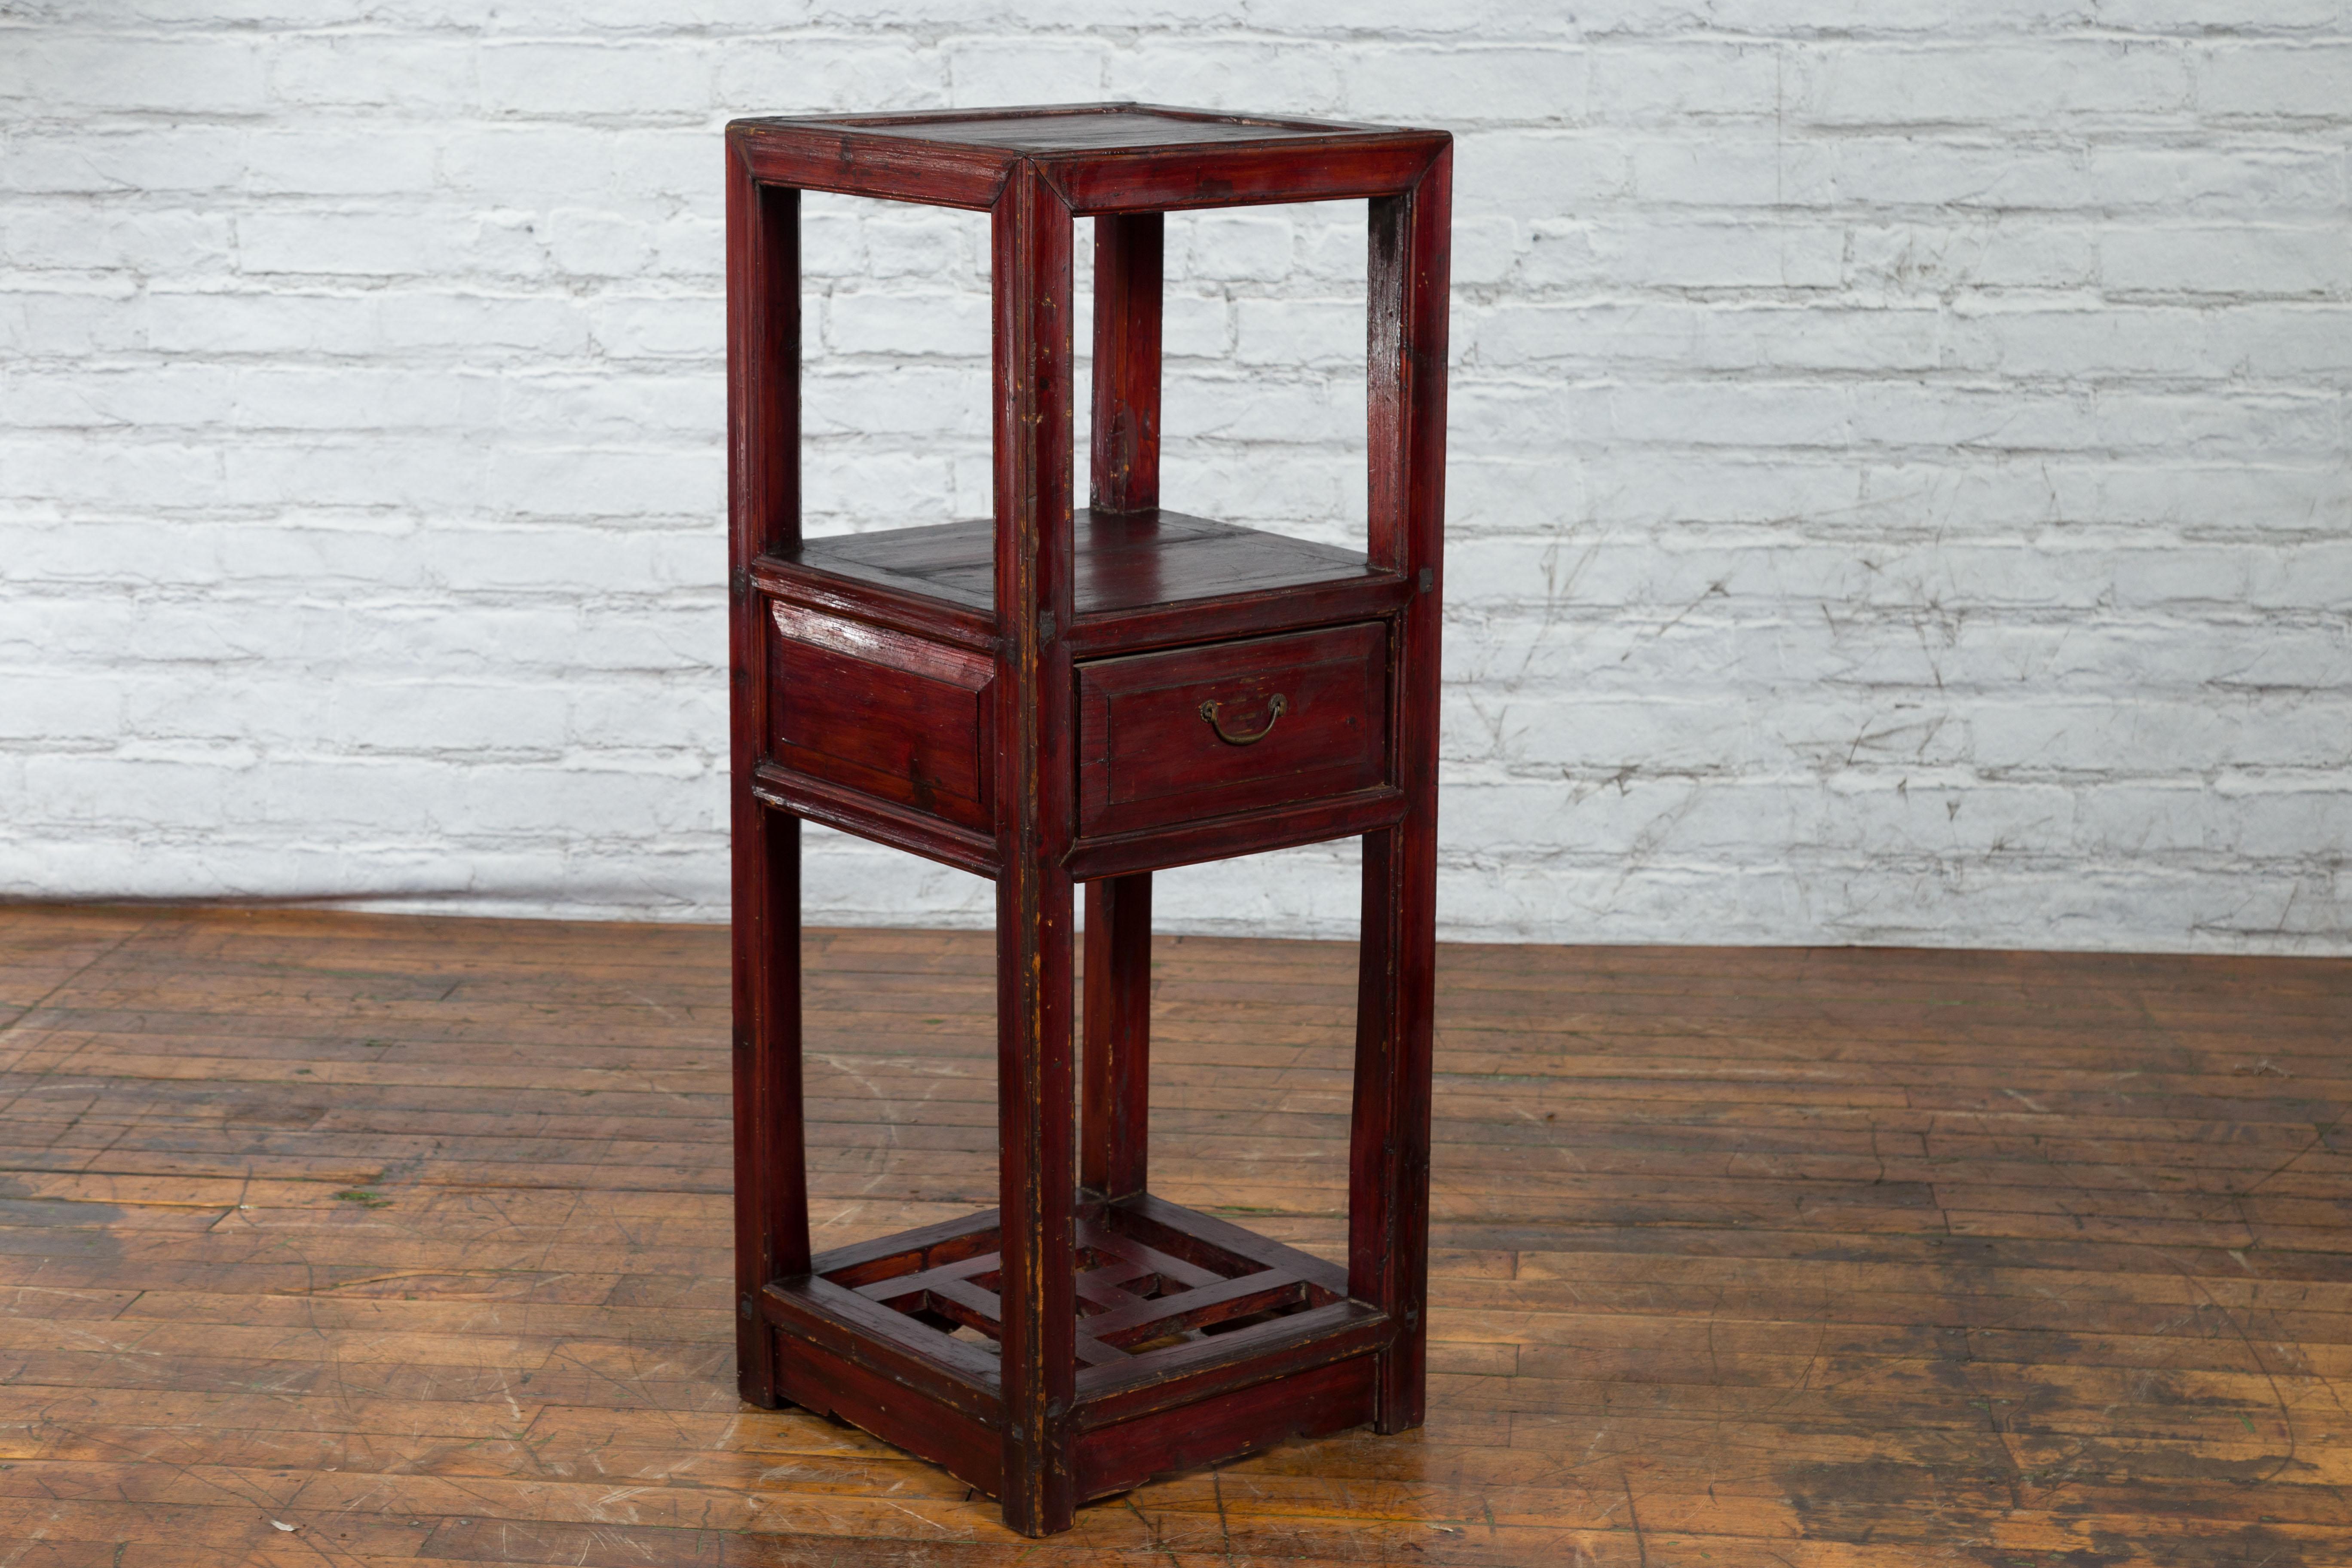 Chinese Late Qing Dynasty 1900s Tiered Table with Drawer and Fretwork Shelf For Sale 4